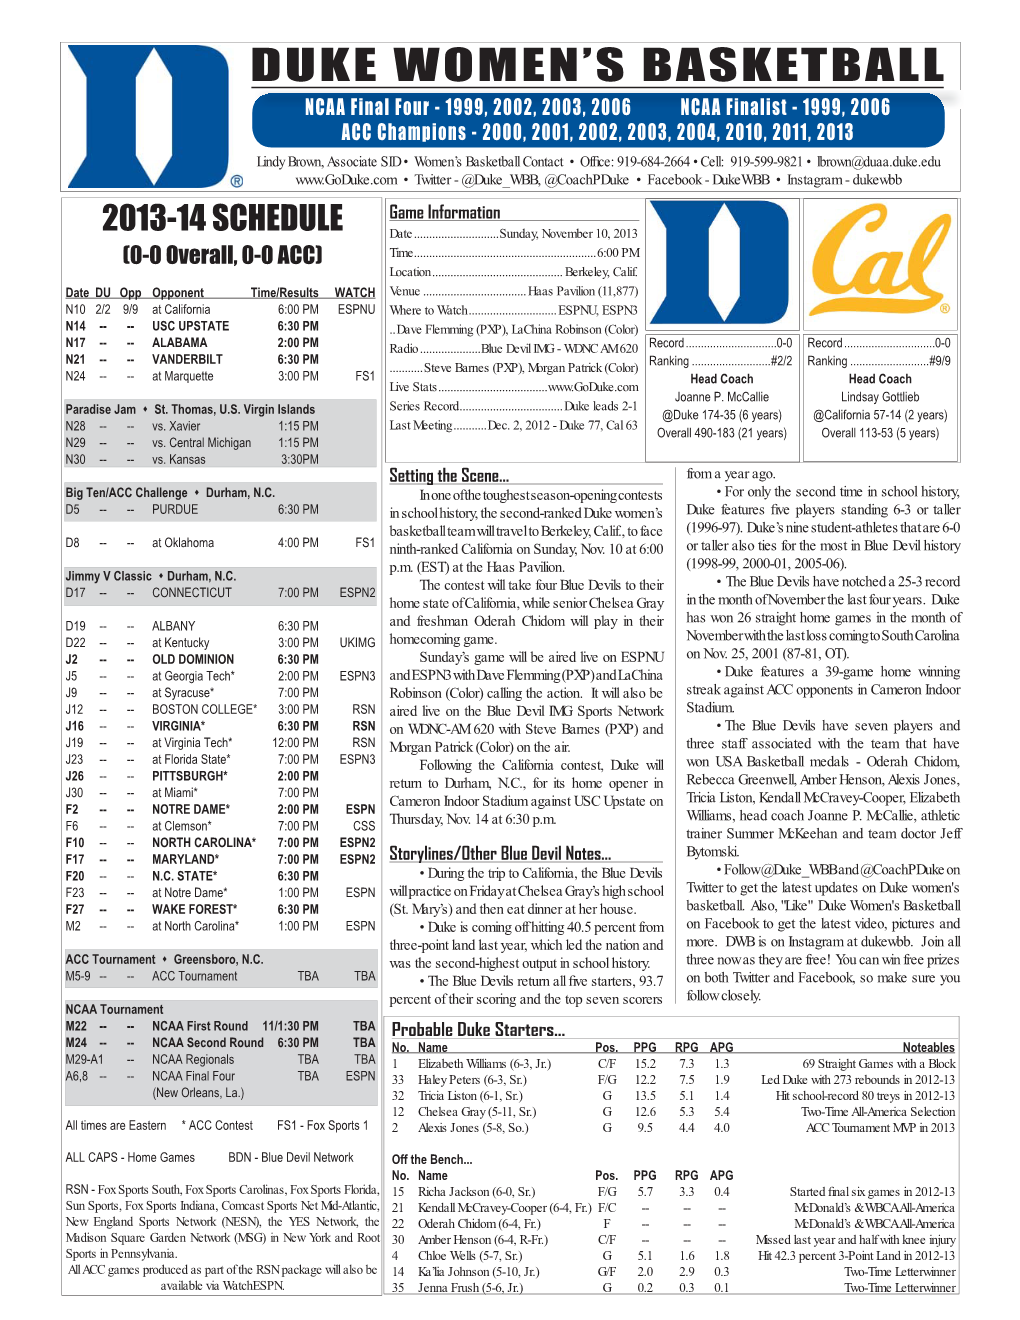 2013-14 WBB Game Notes